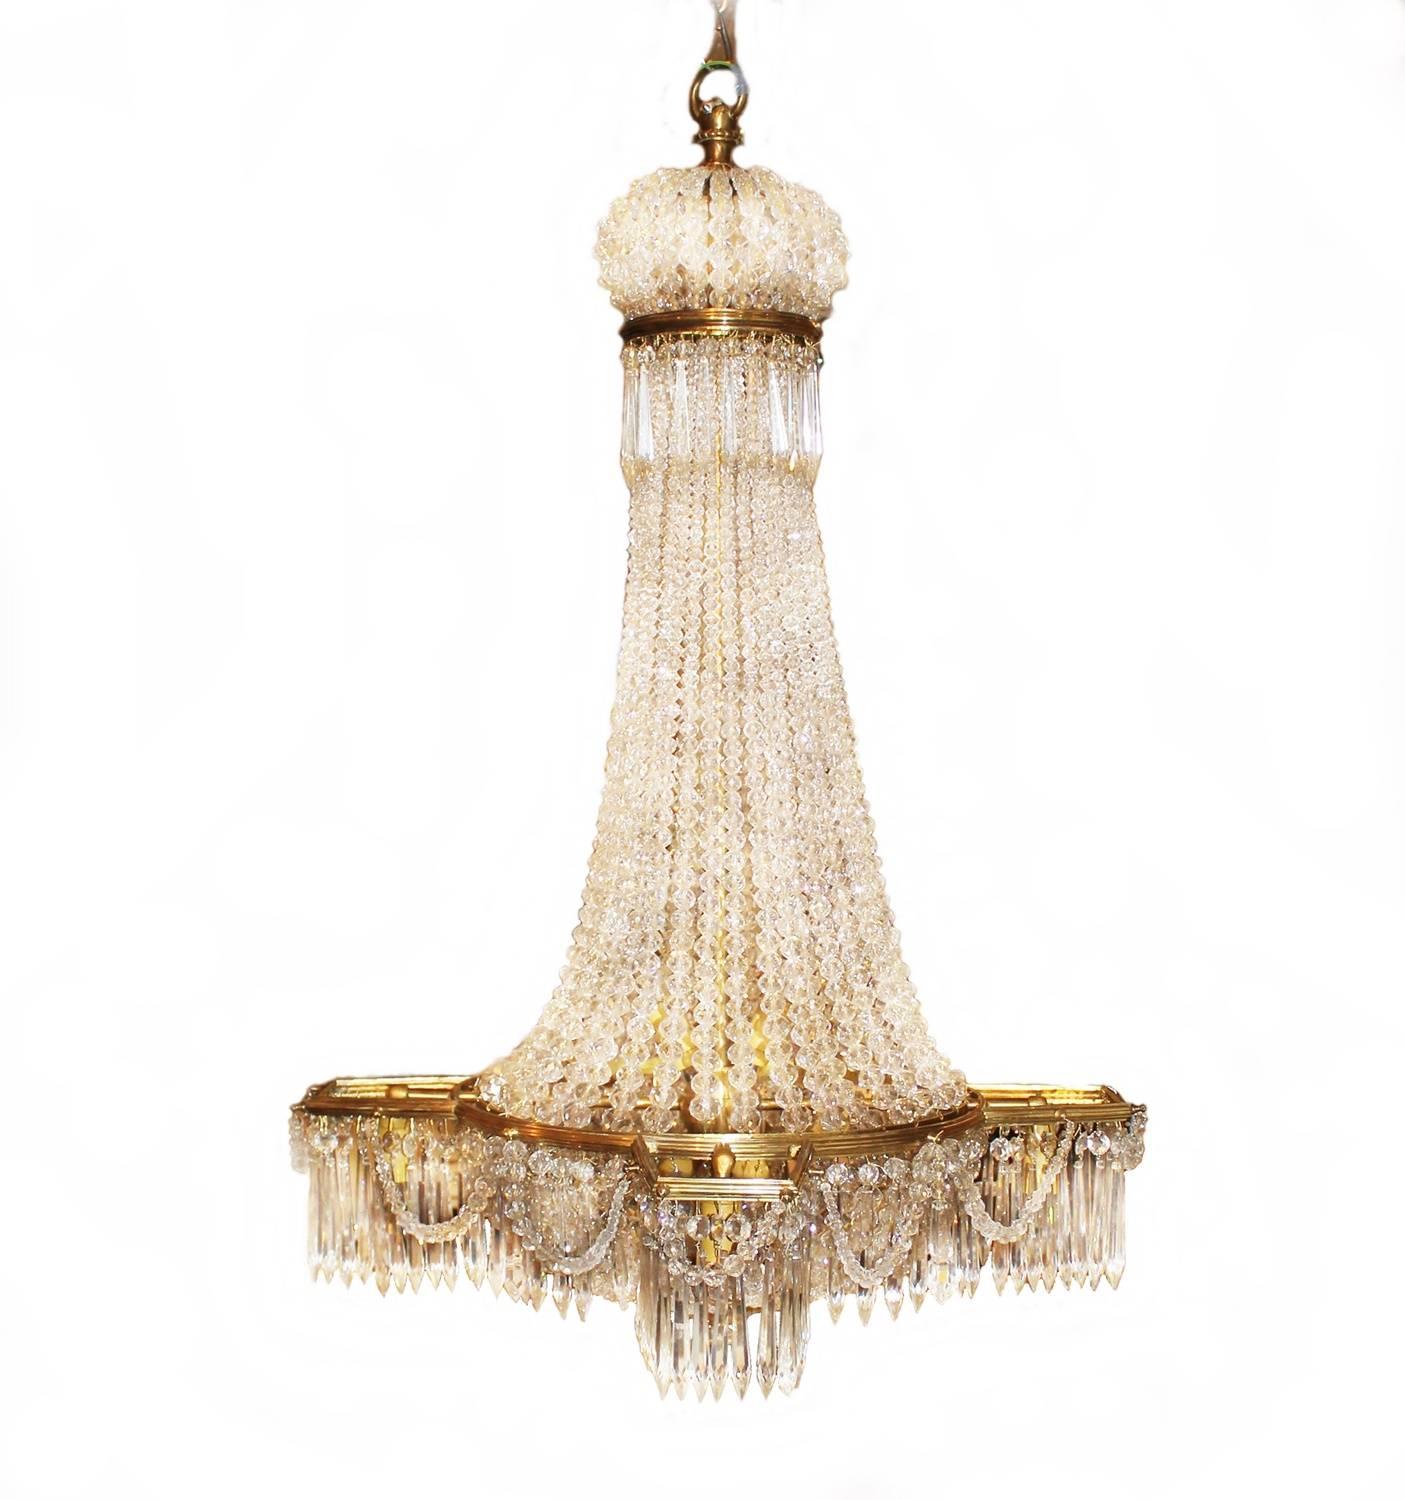 A beautiful and different chandelier made in France, circa 1900. The chandelier is elegant with many smaller prisms and an unusual frame in form and shape.